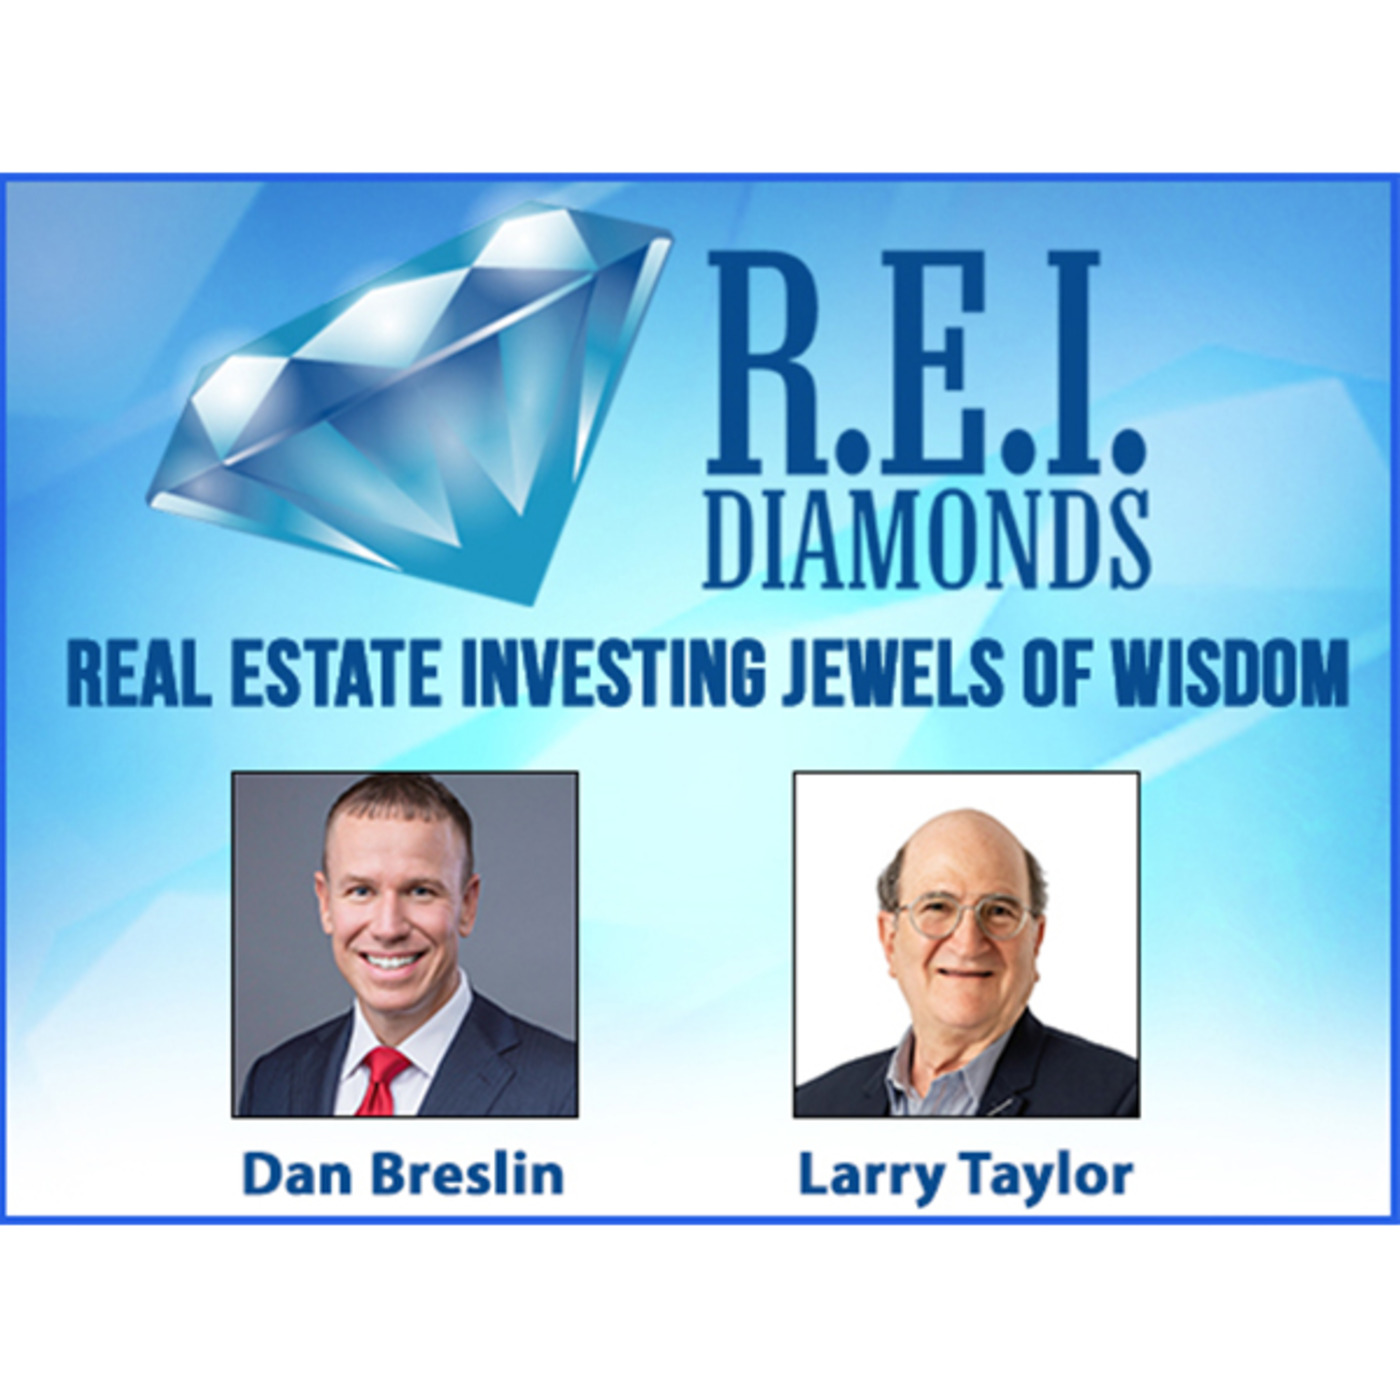 Episode 226: Larry Taylor on Los Angeles Real Estate Investment & Development